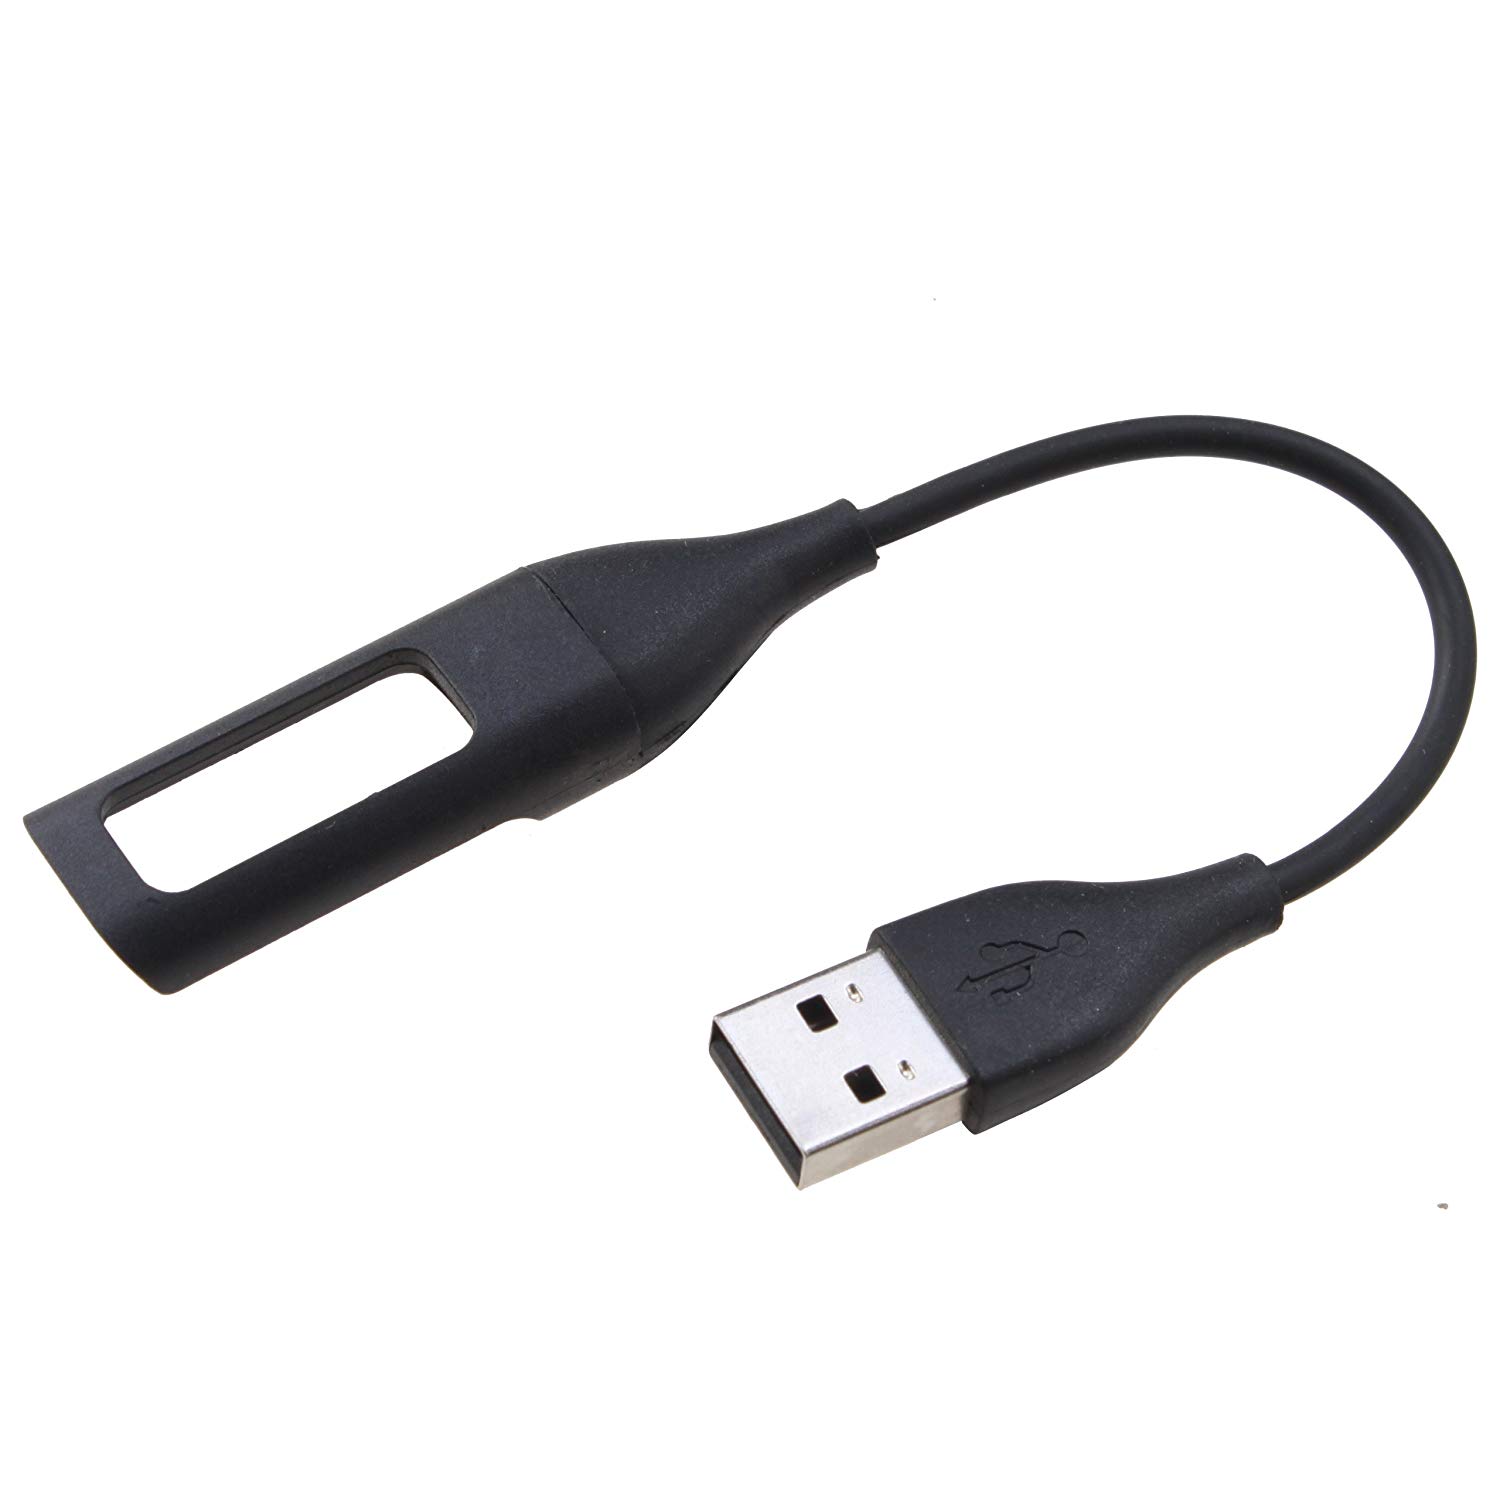 Replacement USB Charging Charger Cable Cord for Fitbit Flex Wireless Activity Bracelet 